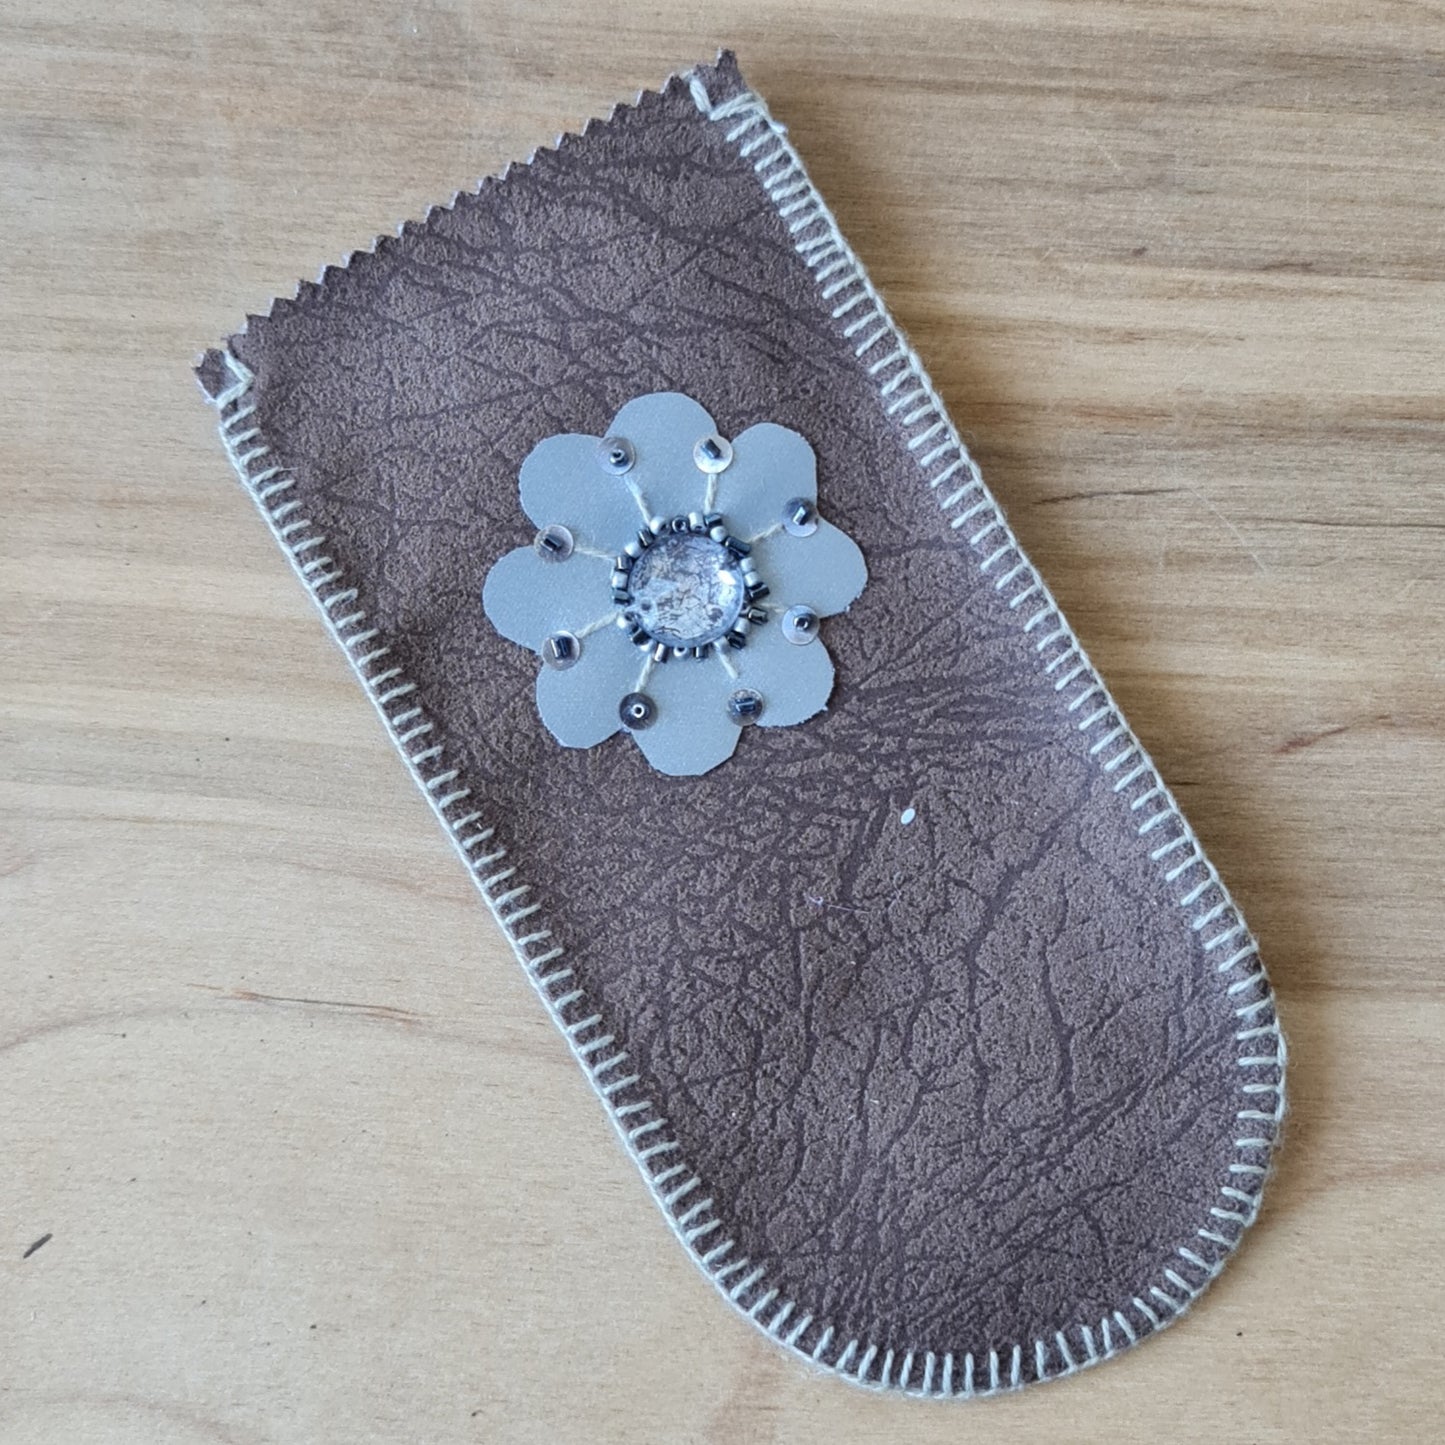 Stitched glasses case in brown color made of suede type fabric with reflective sun sign on one side and oak on the other side and white cotton lining 17 x 8.5 cm (AMA)